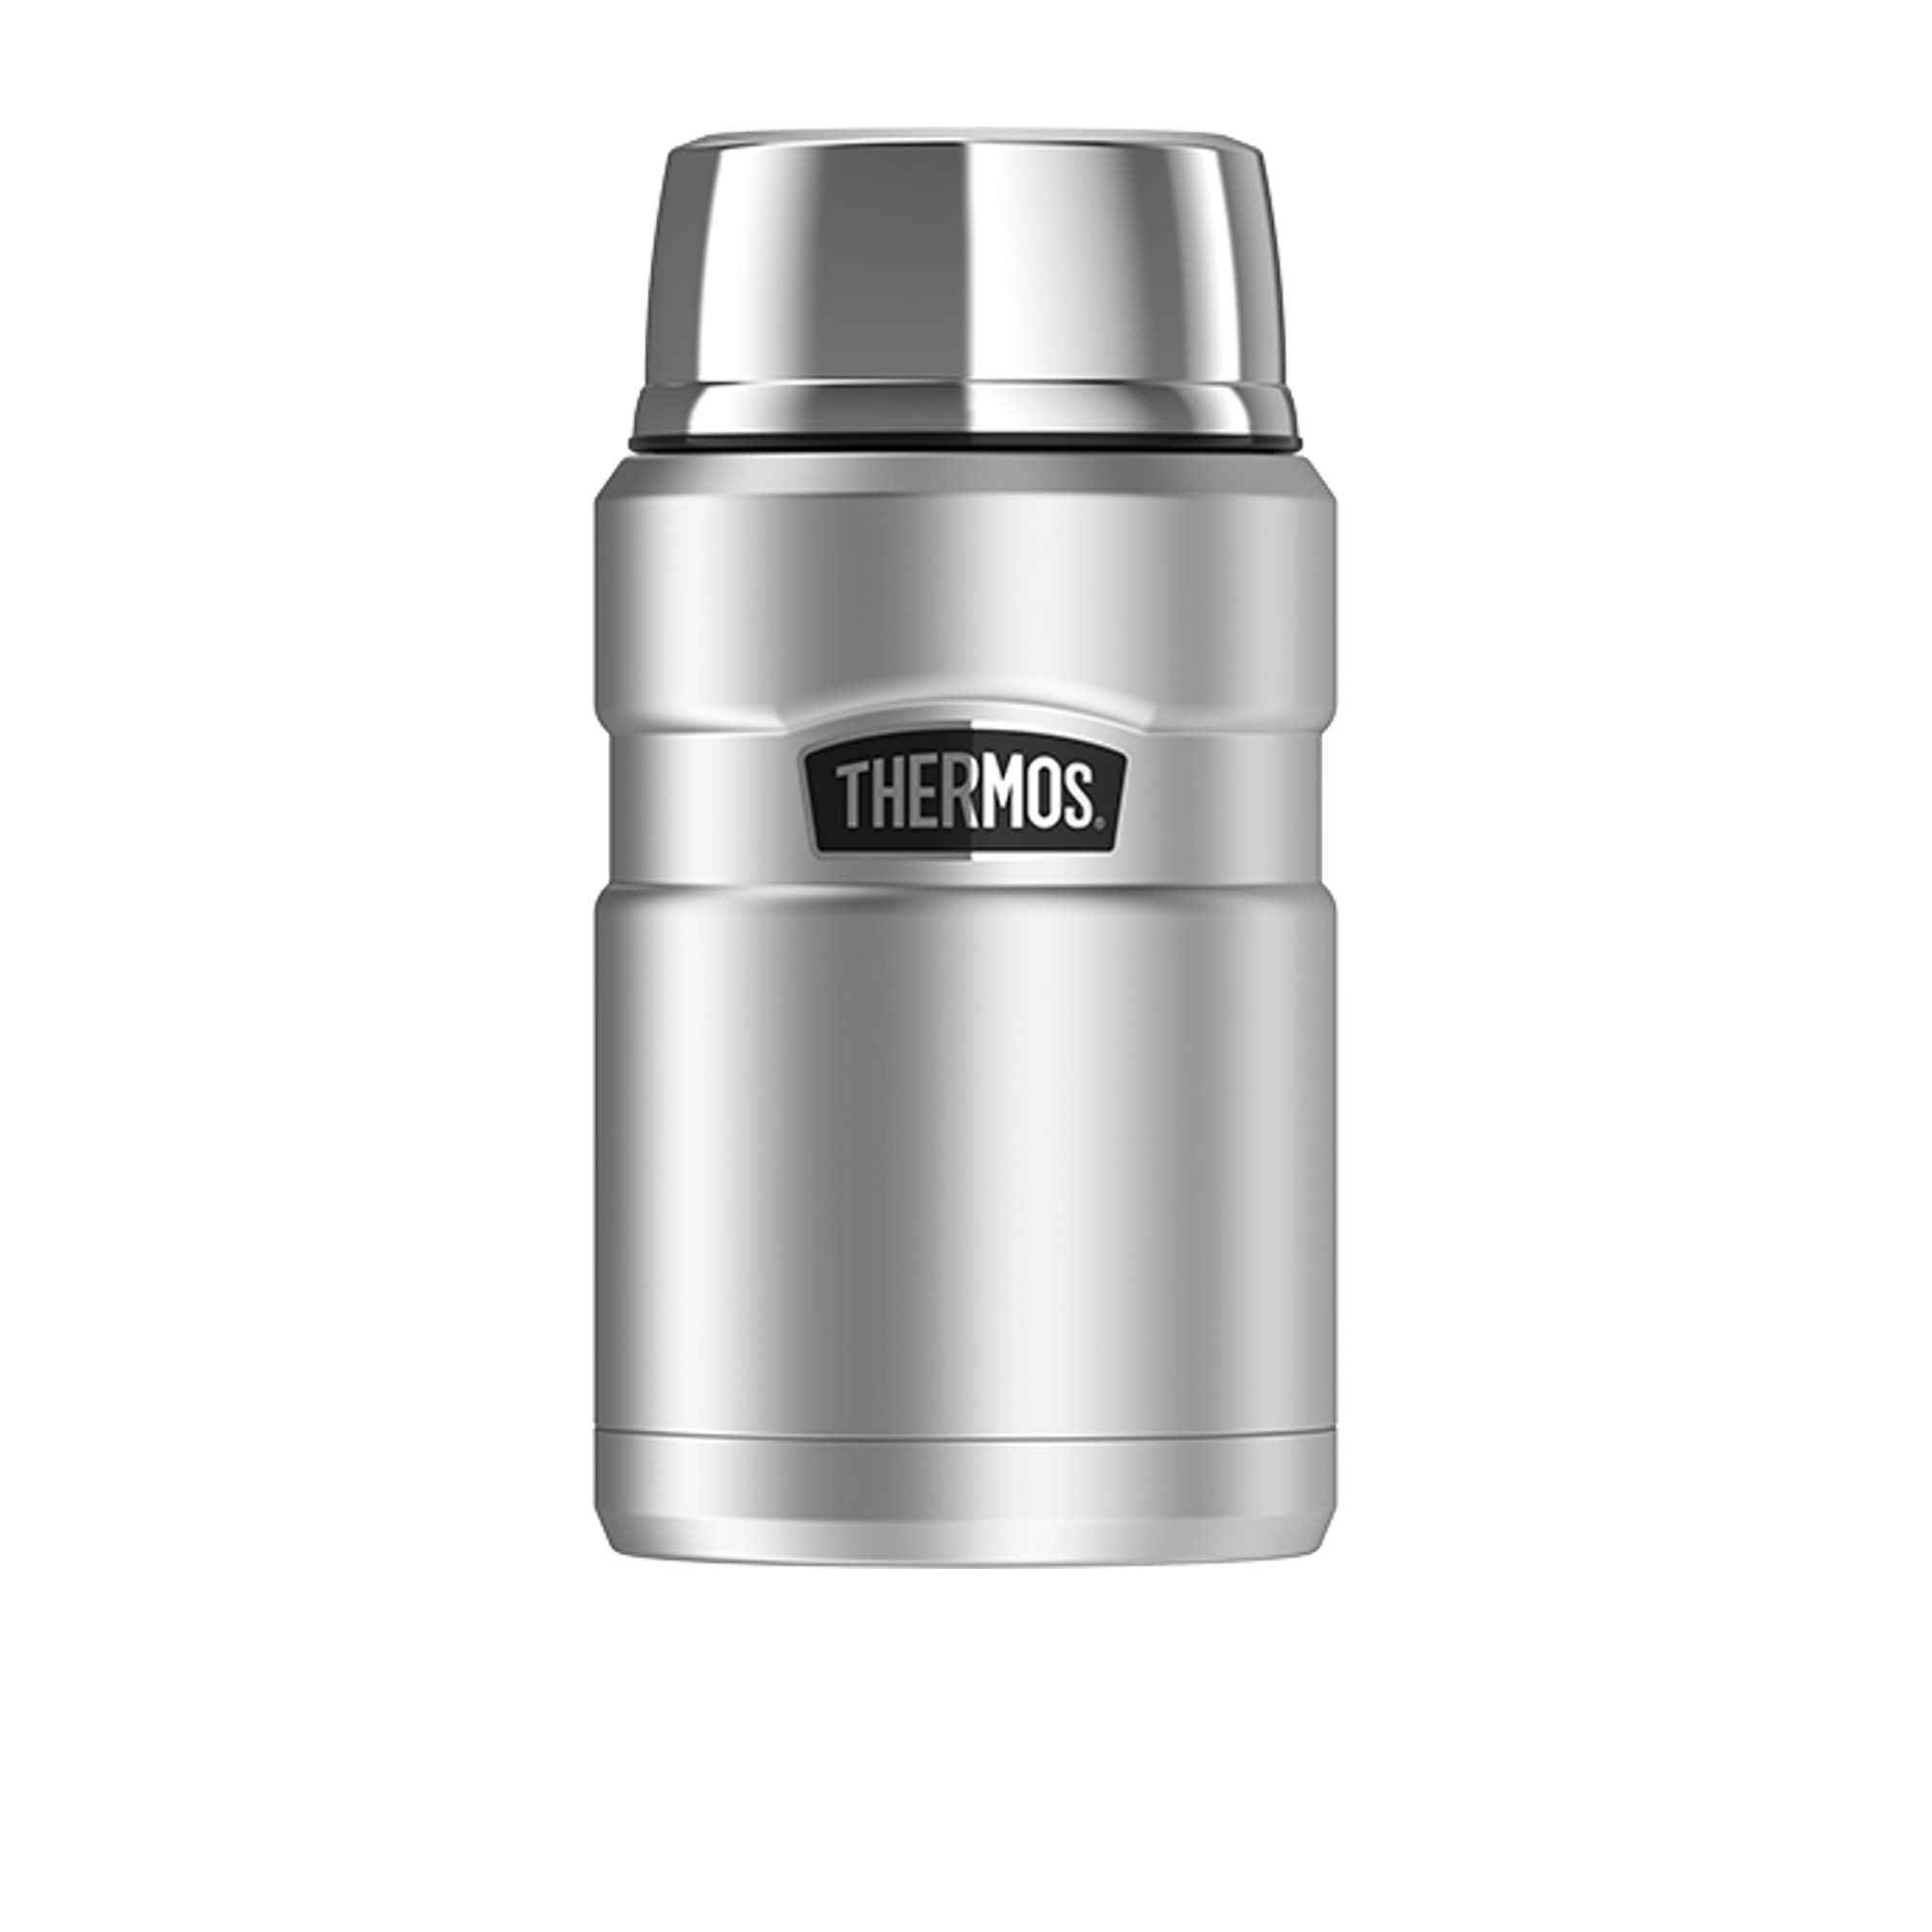 Thermos Stainless King Insulated Food Jar 710ml Stainless Steel Image 1